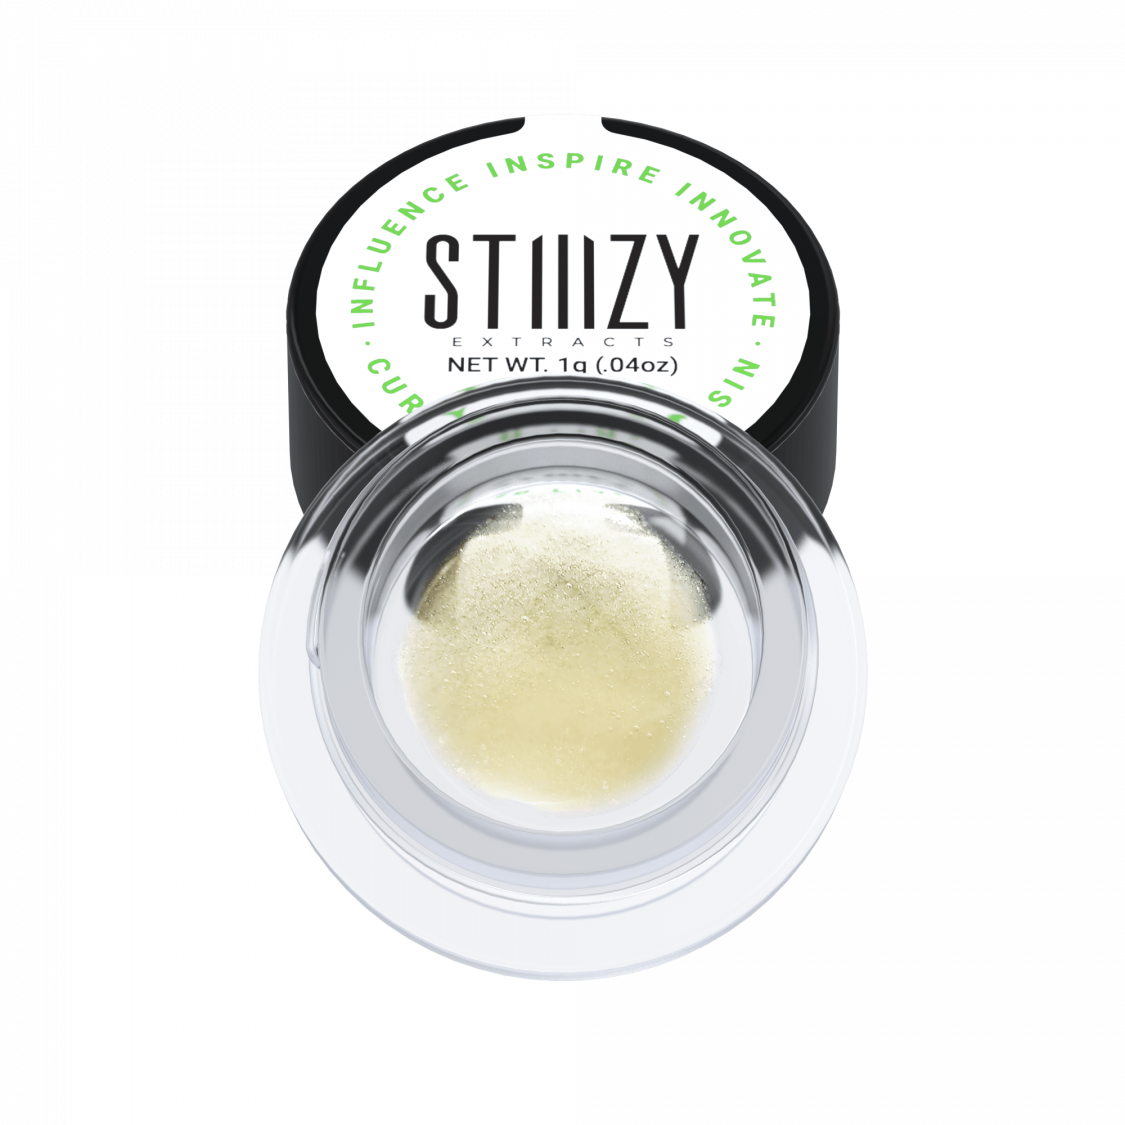 STIIIZY Orange Kush Cake Curated Live Resin Concentrates Live Resin